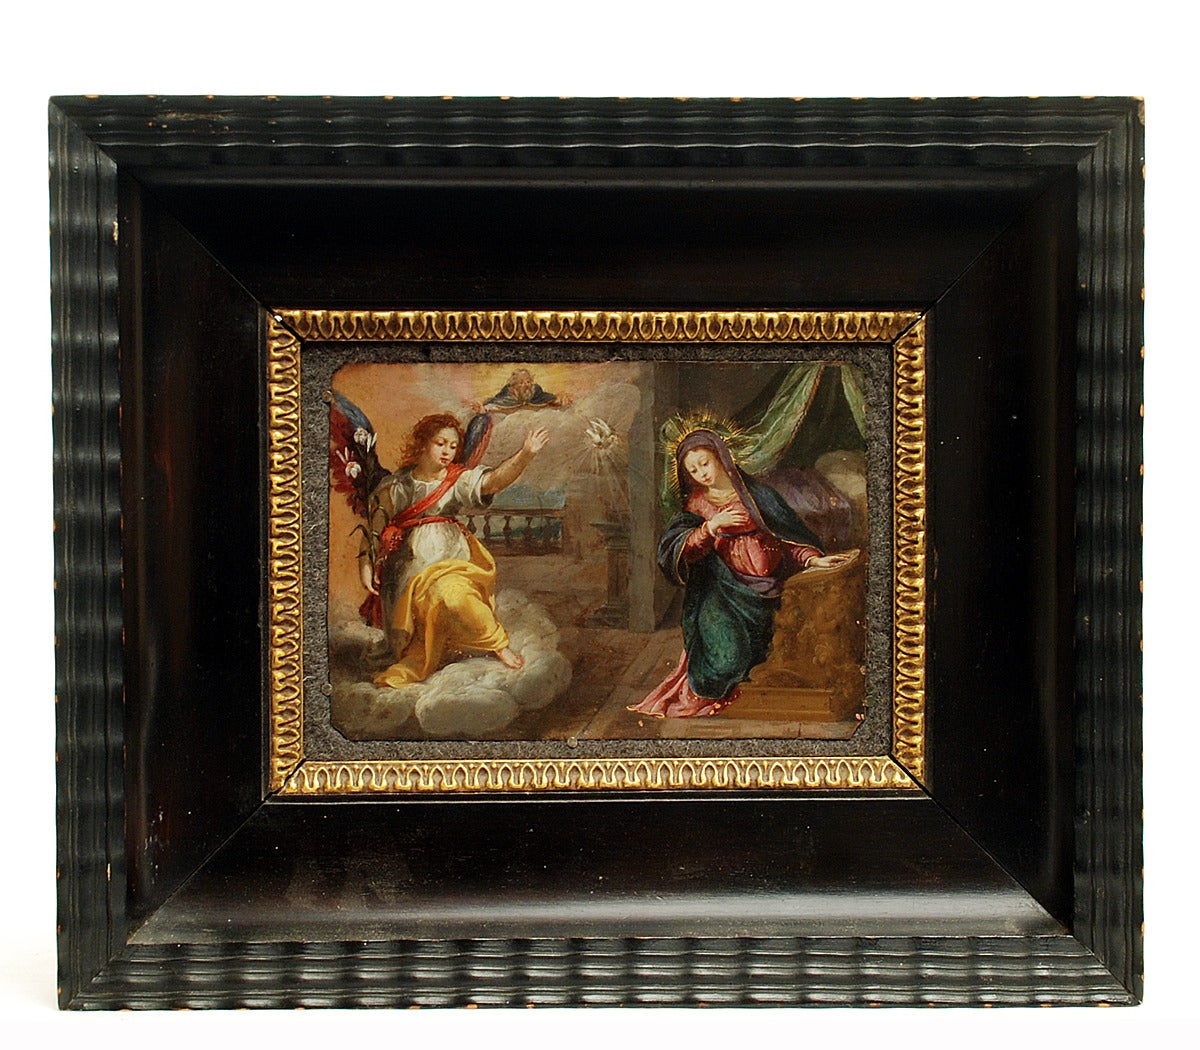 A stunning 17th century Italian Renaissance period oil on copper, 'The Annunciation of the Blessed Virgin Mary.' The Annunciation is a celebration of the announcement by the Archangel Gabriel to the Virgin Mary that she would conceive and become the